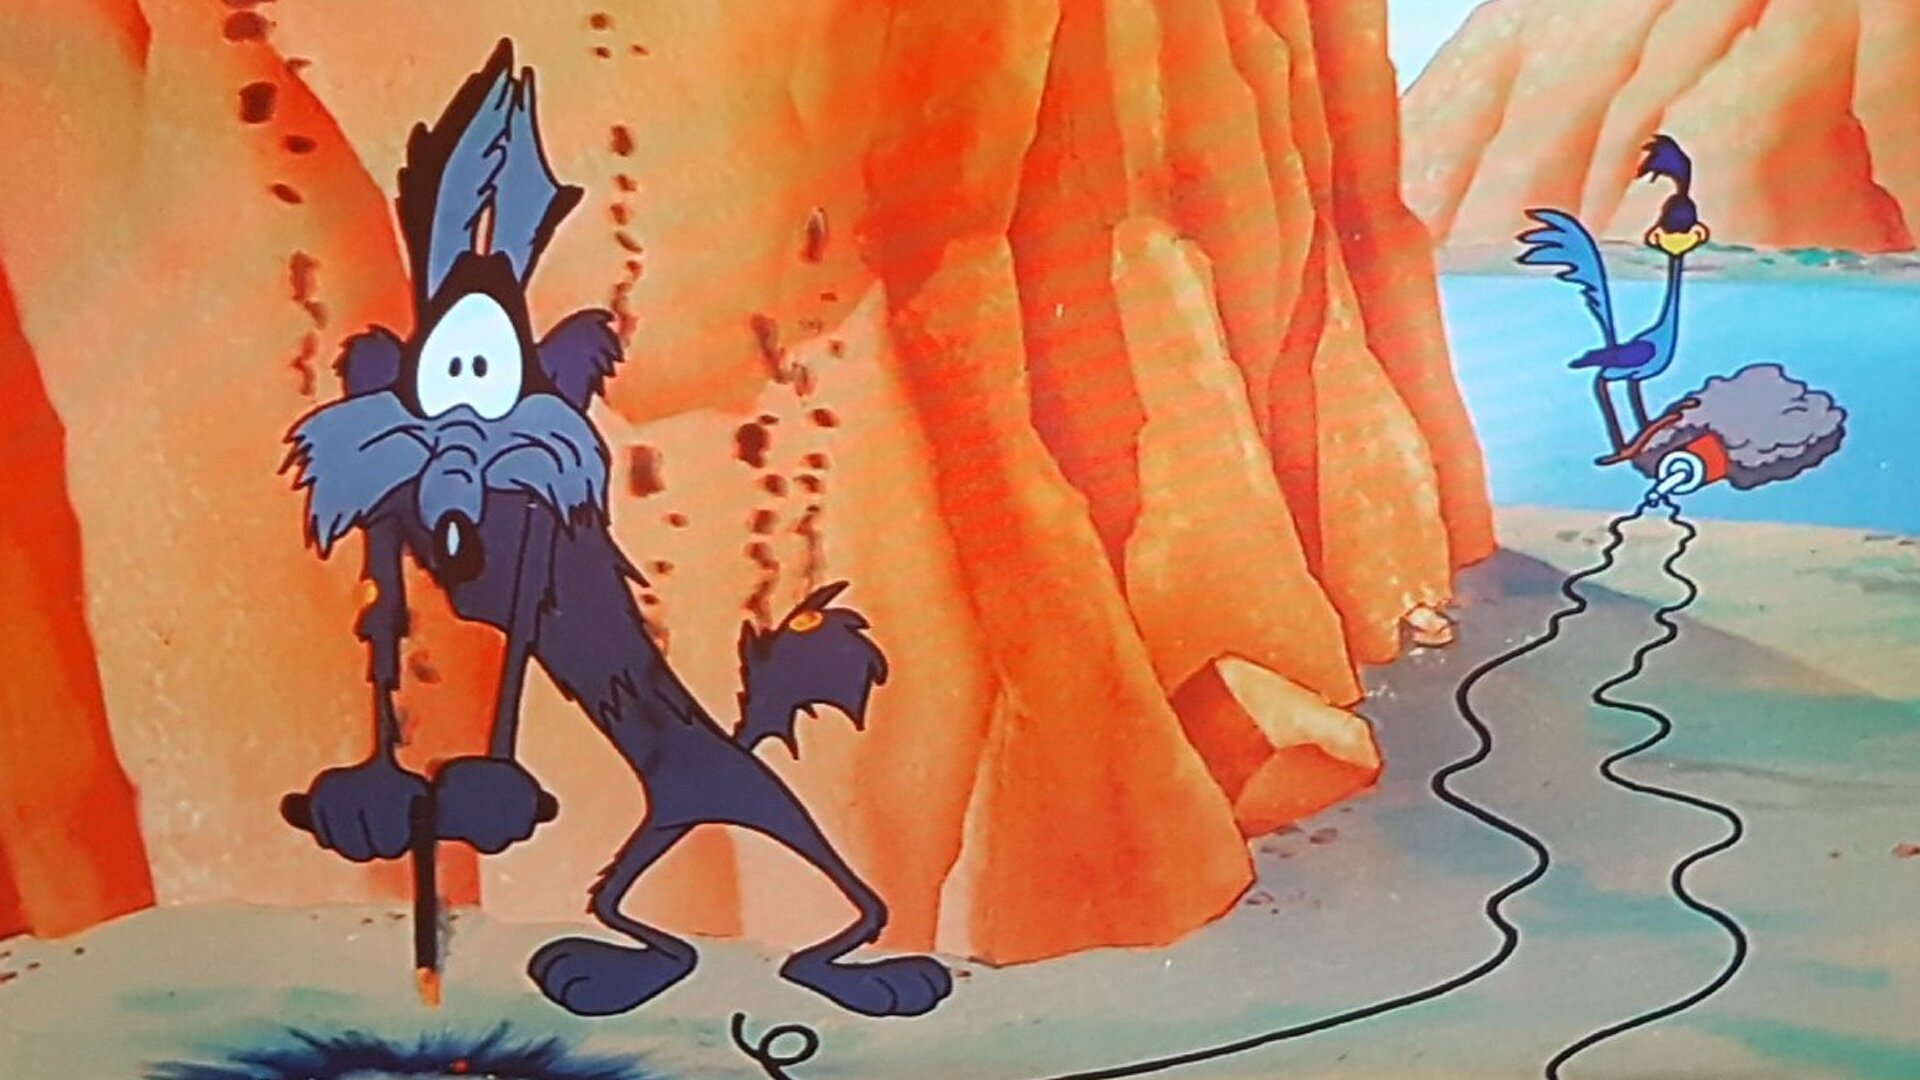 Acme's ill-functioning traps put Wile E in danger